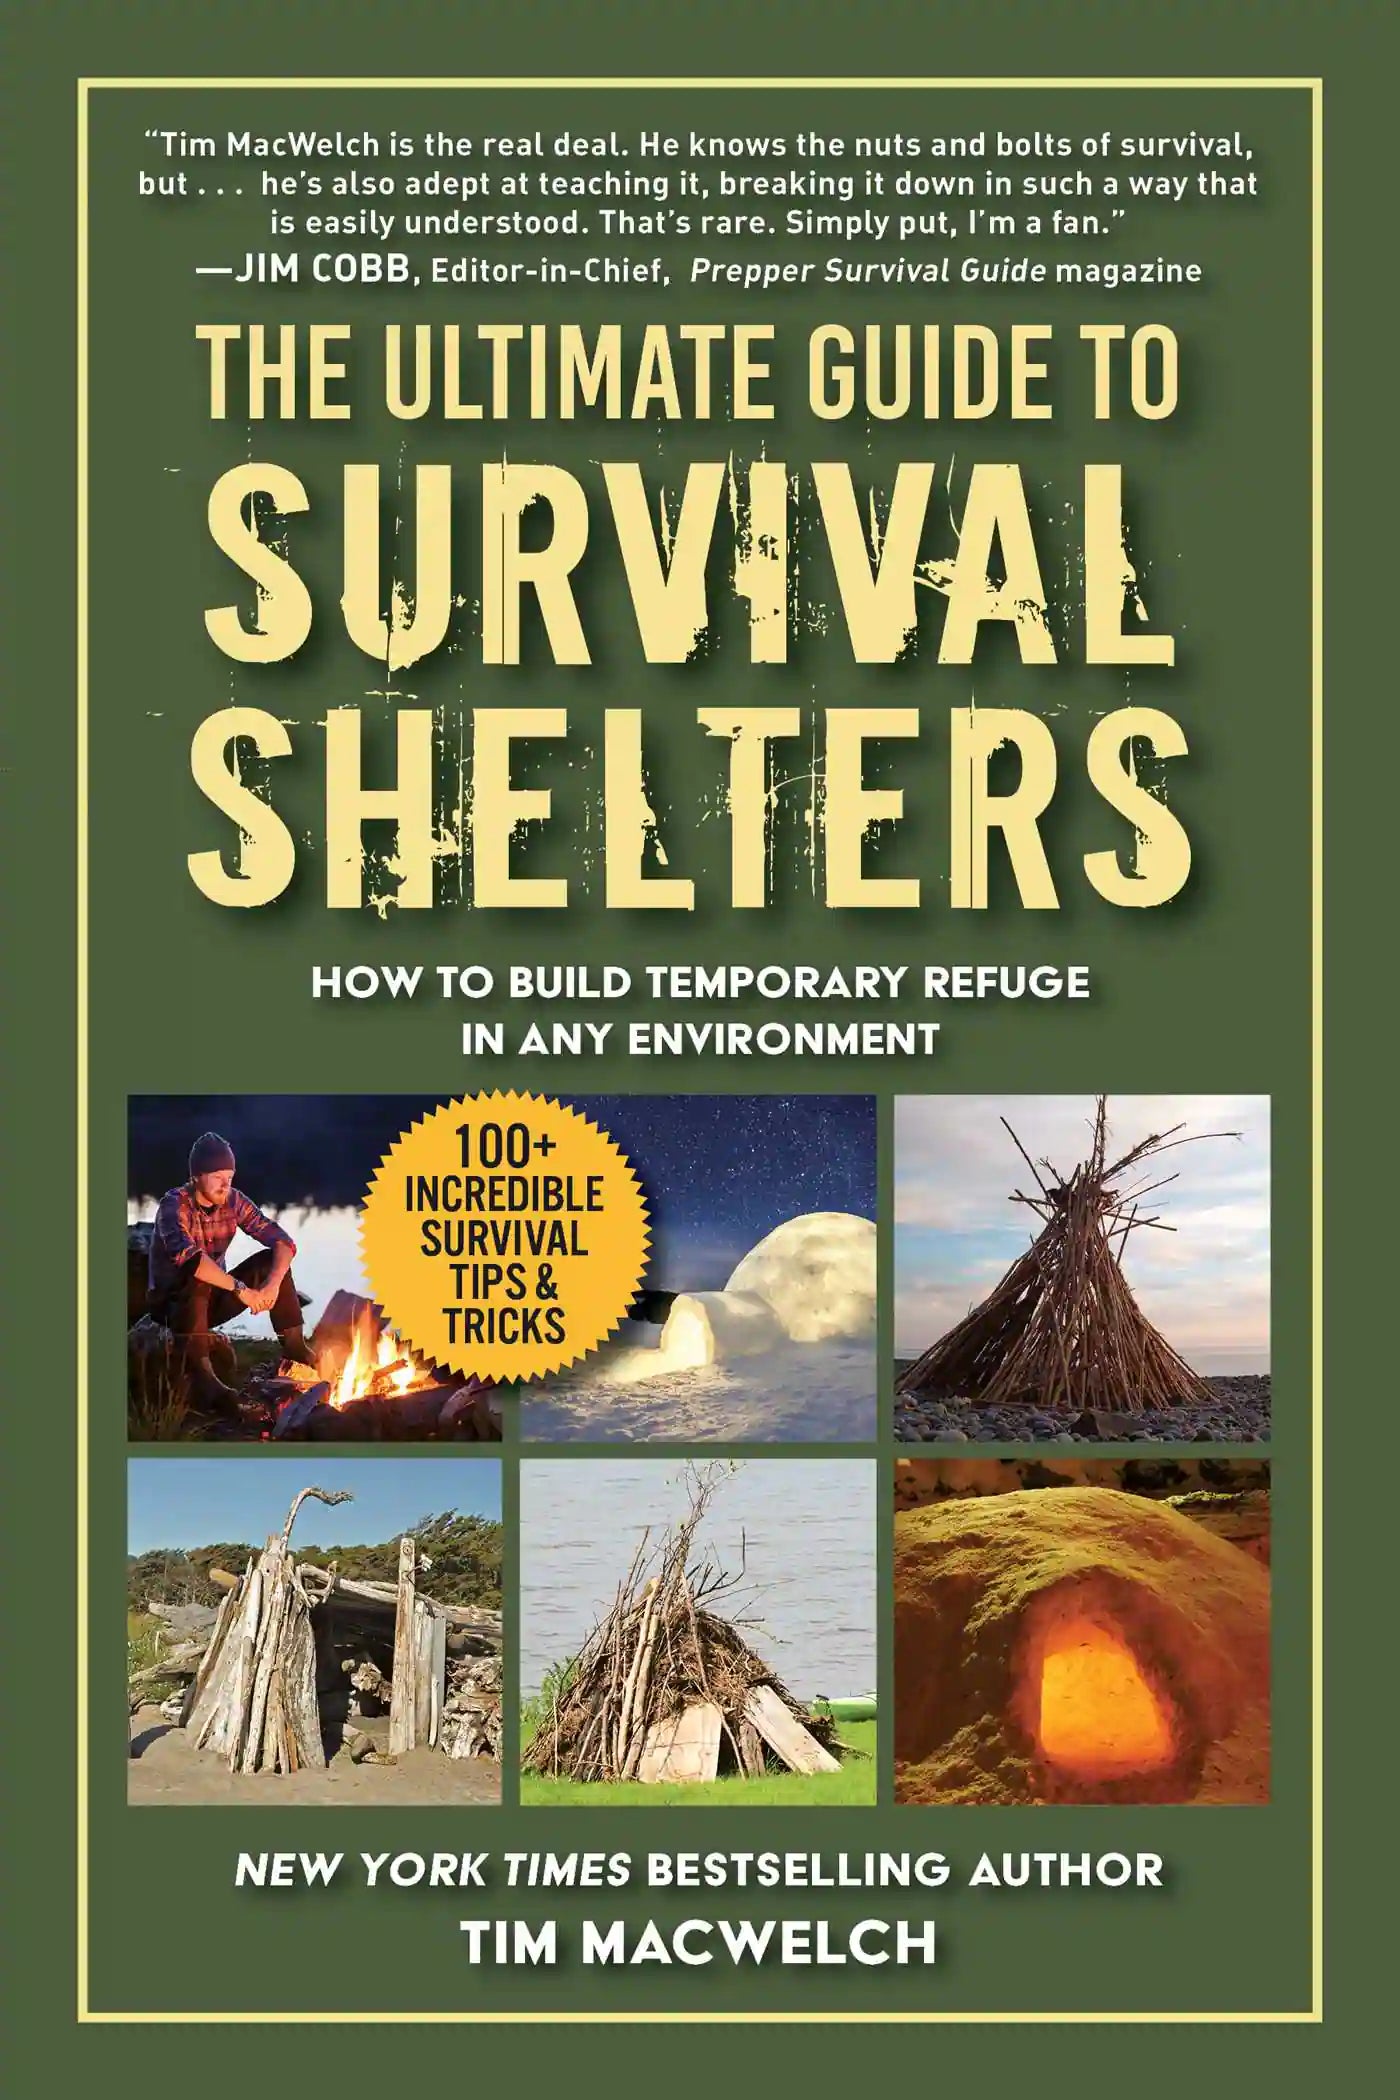 The Ultimate Guide to Survival Shelters